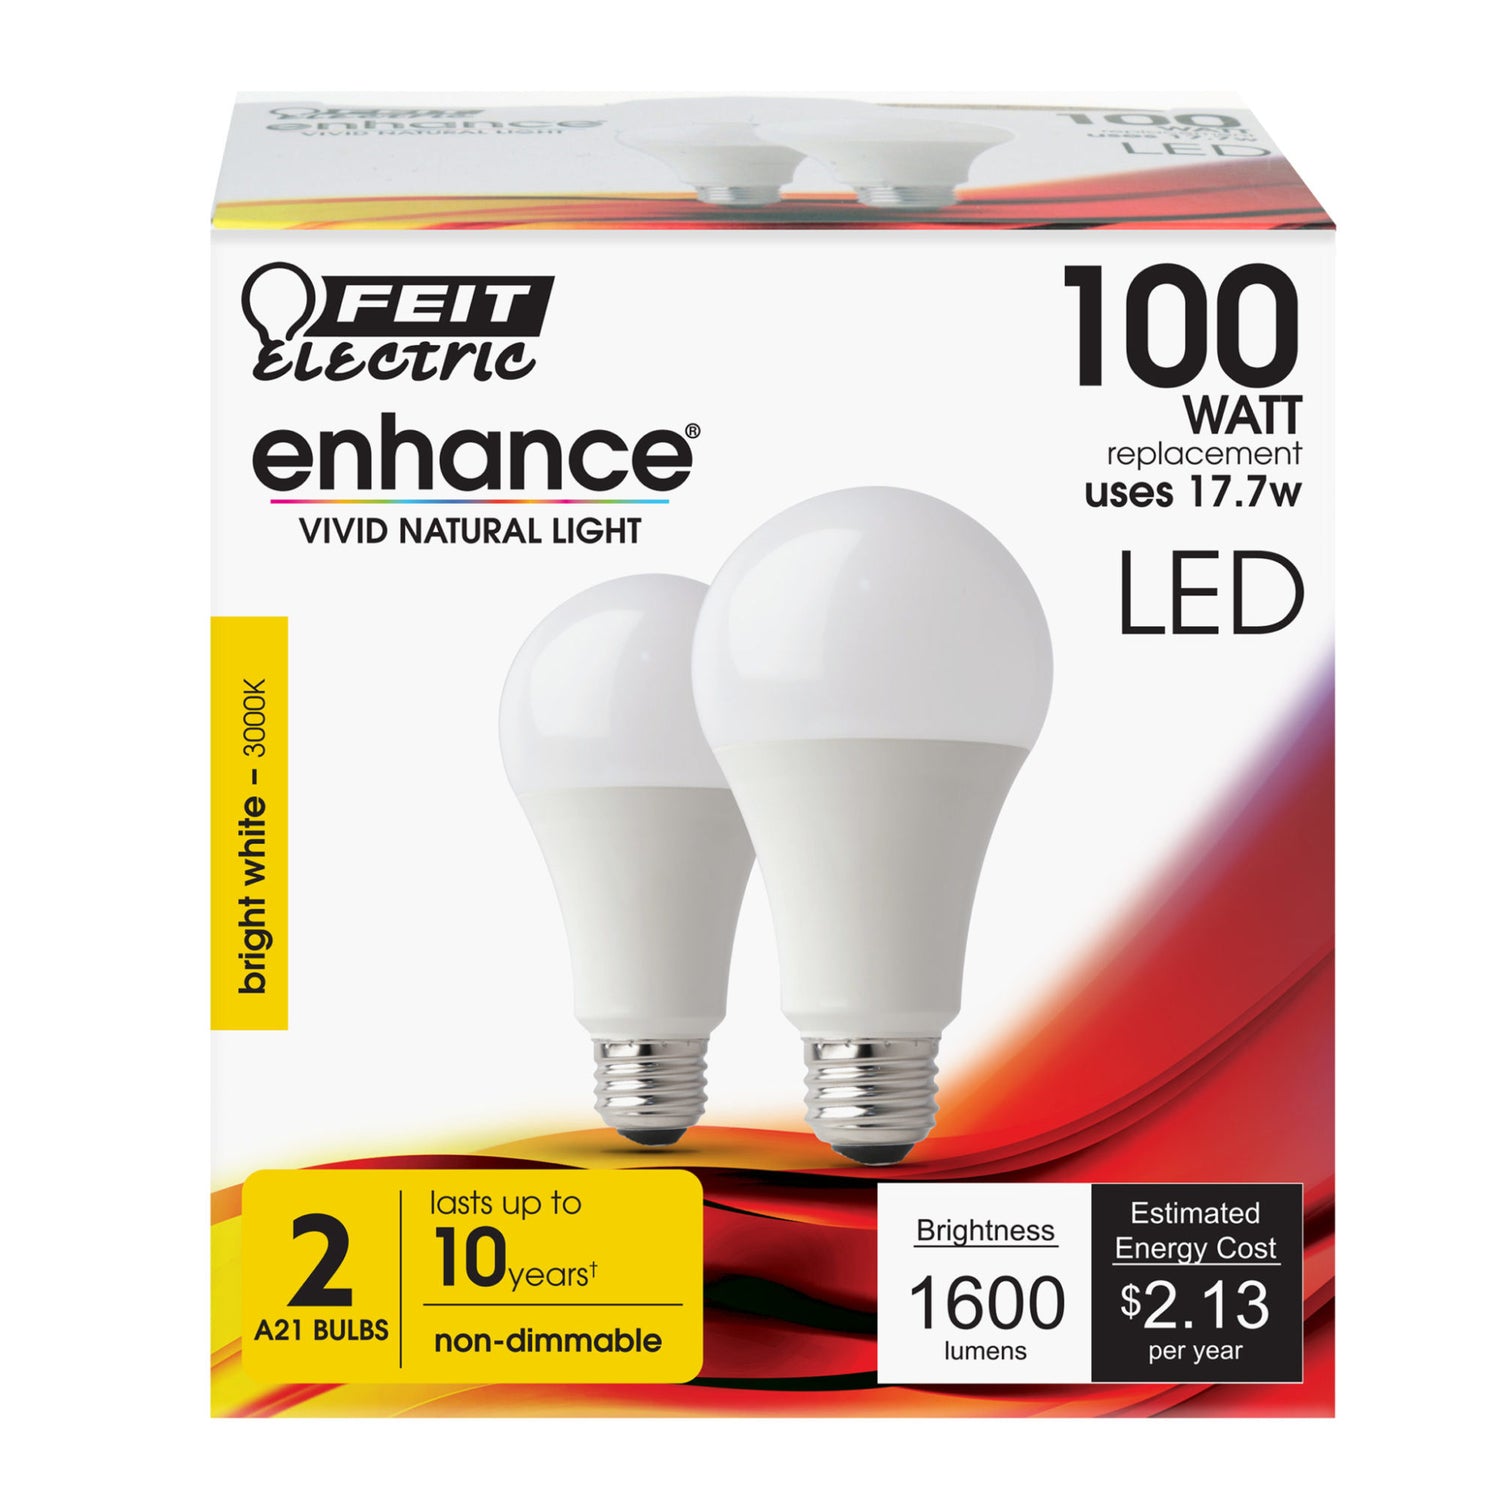 17.7W (100W Replacement) Bright White (3000K) E26 Base A19 Non-Dimmable Enhance 10K LED Light Bulb (2-Pack)